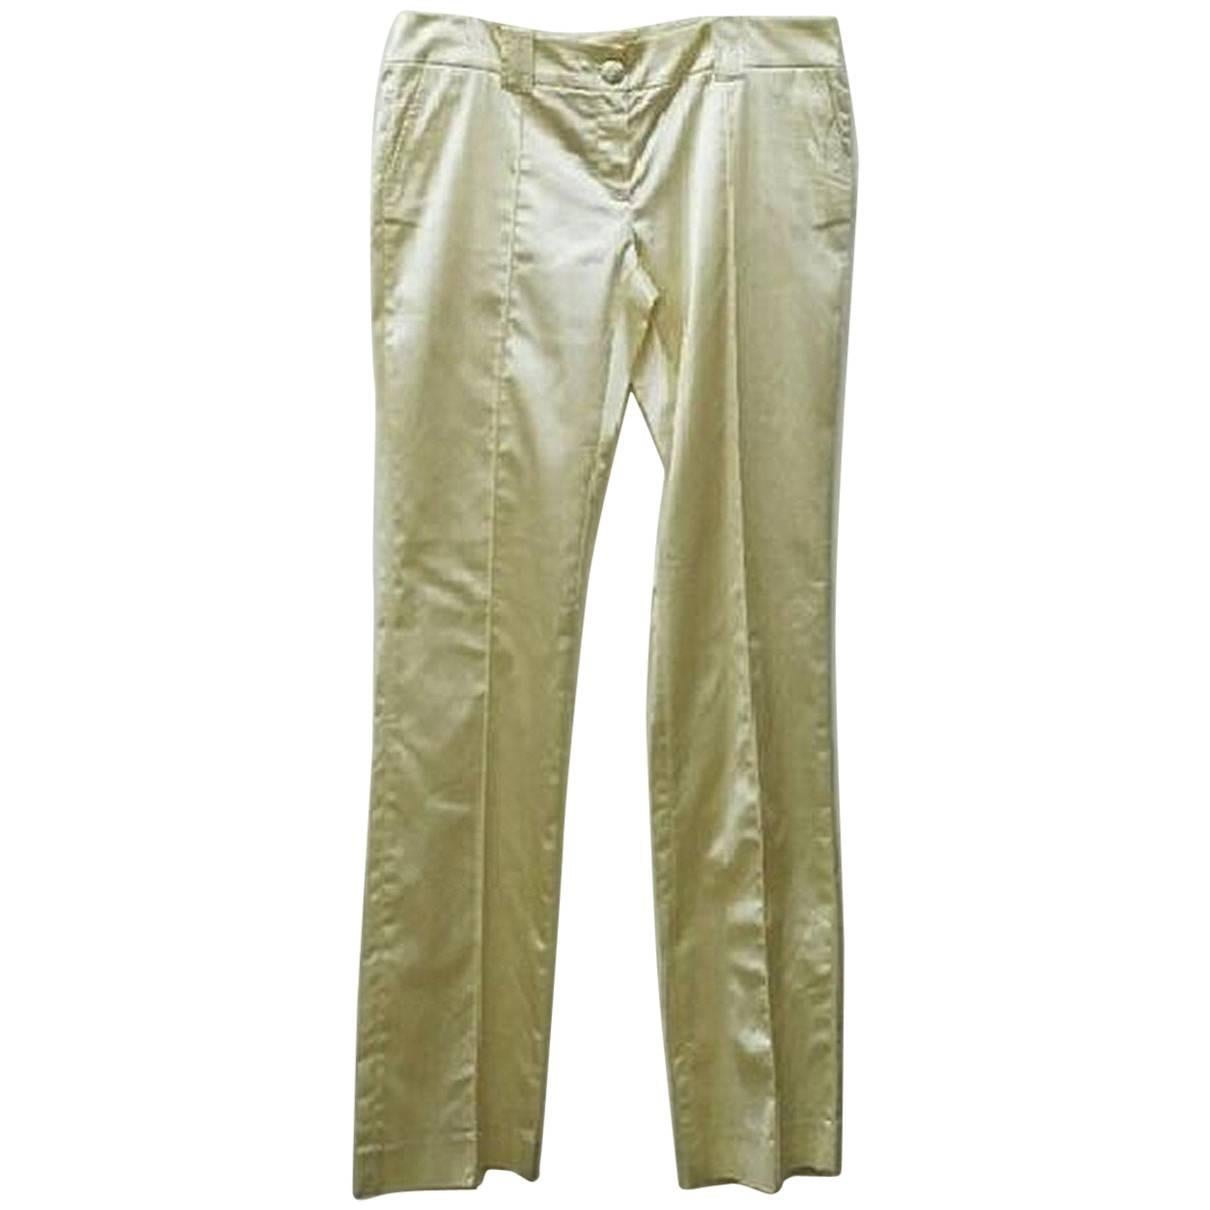 Roberto Cavalli Class Trousers Pants - Size: 12 (L, 32, 33) For Sale